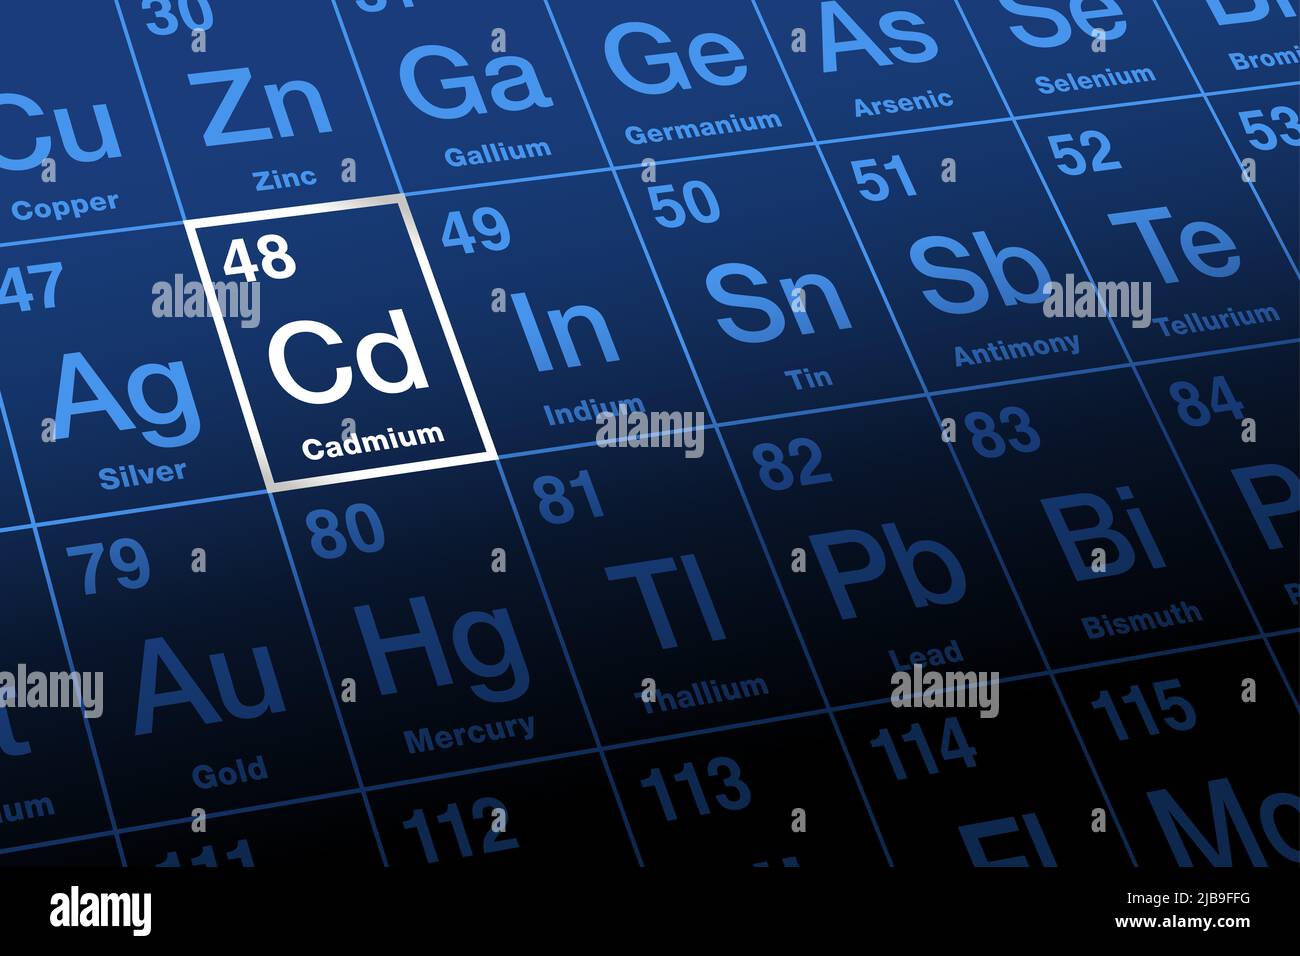 Cadmium on periodic table of the elements. Metal and chemical element, symbol Cd and atomic number 48. Used as steel plating and color pigments. Stock Photo